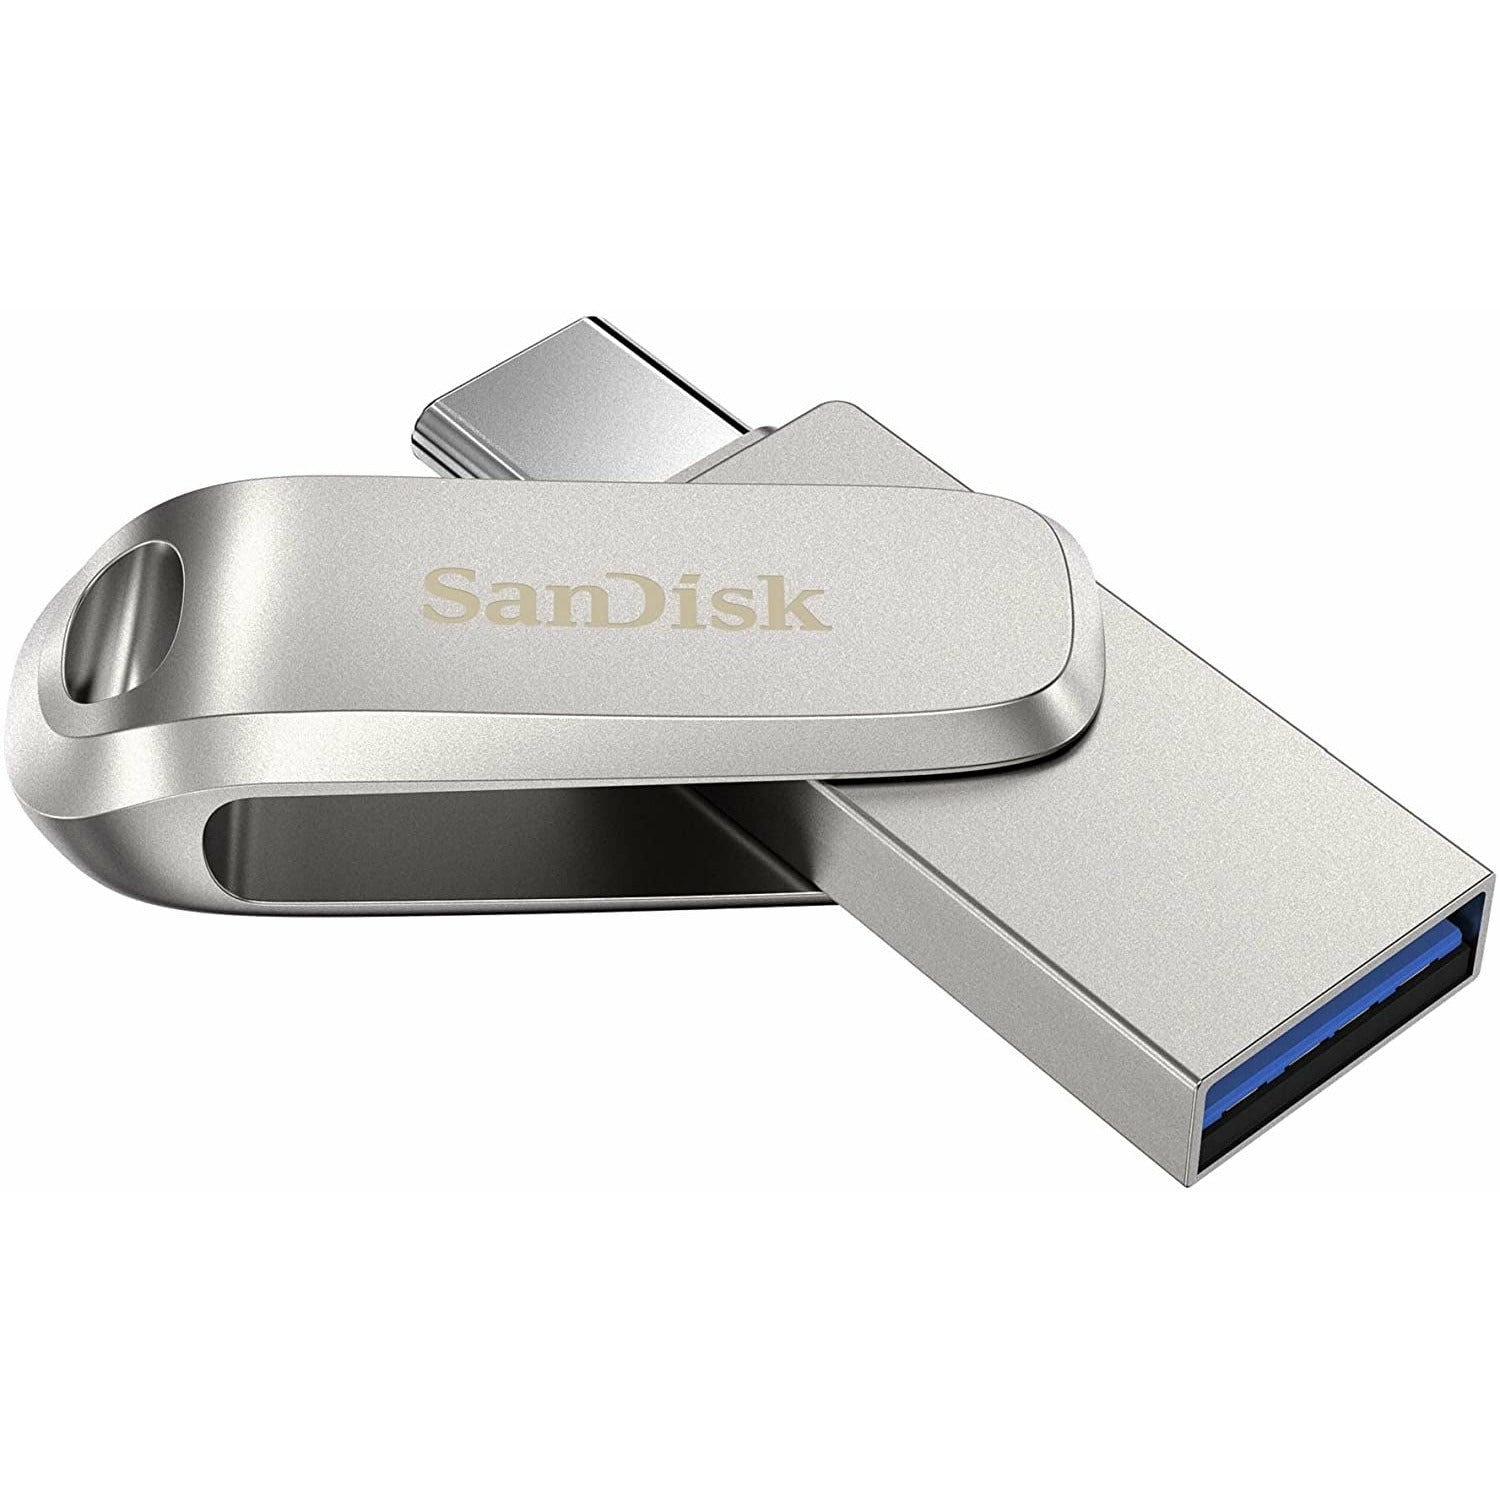 SANDISK 64G SDDDC4-064G-G46  Ultra Dual Drive Luxe USB3.1 Type-C (150MB) New